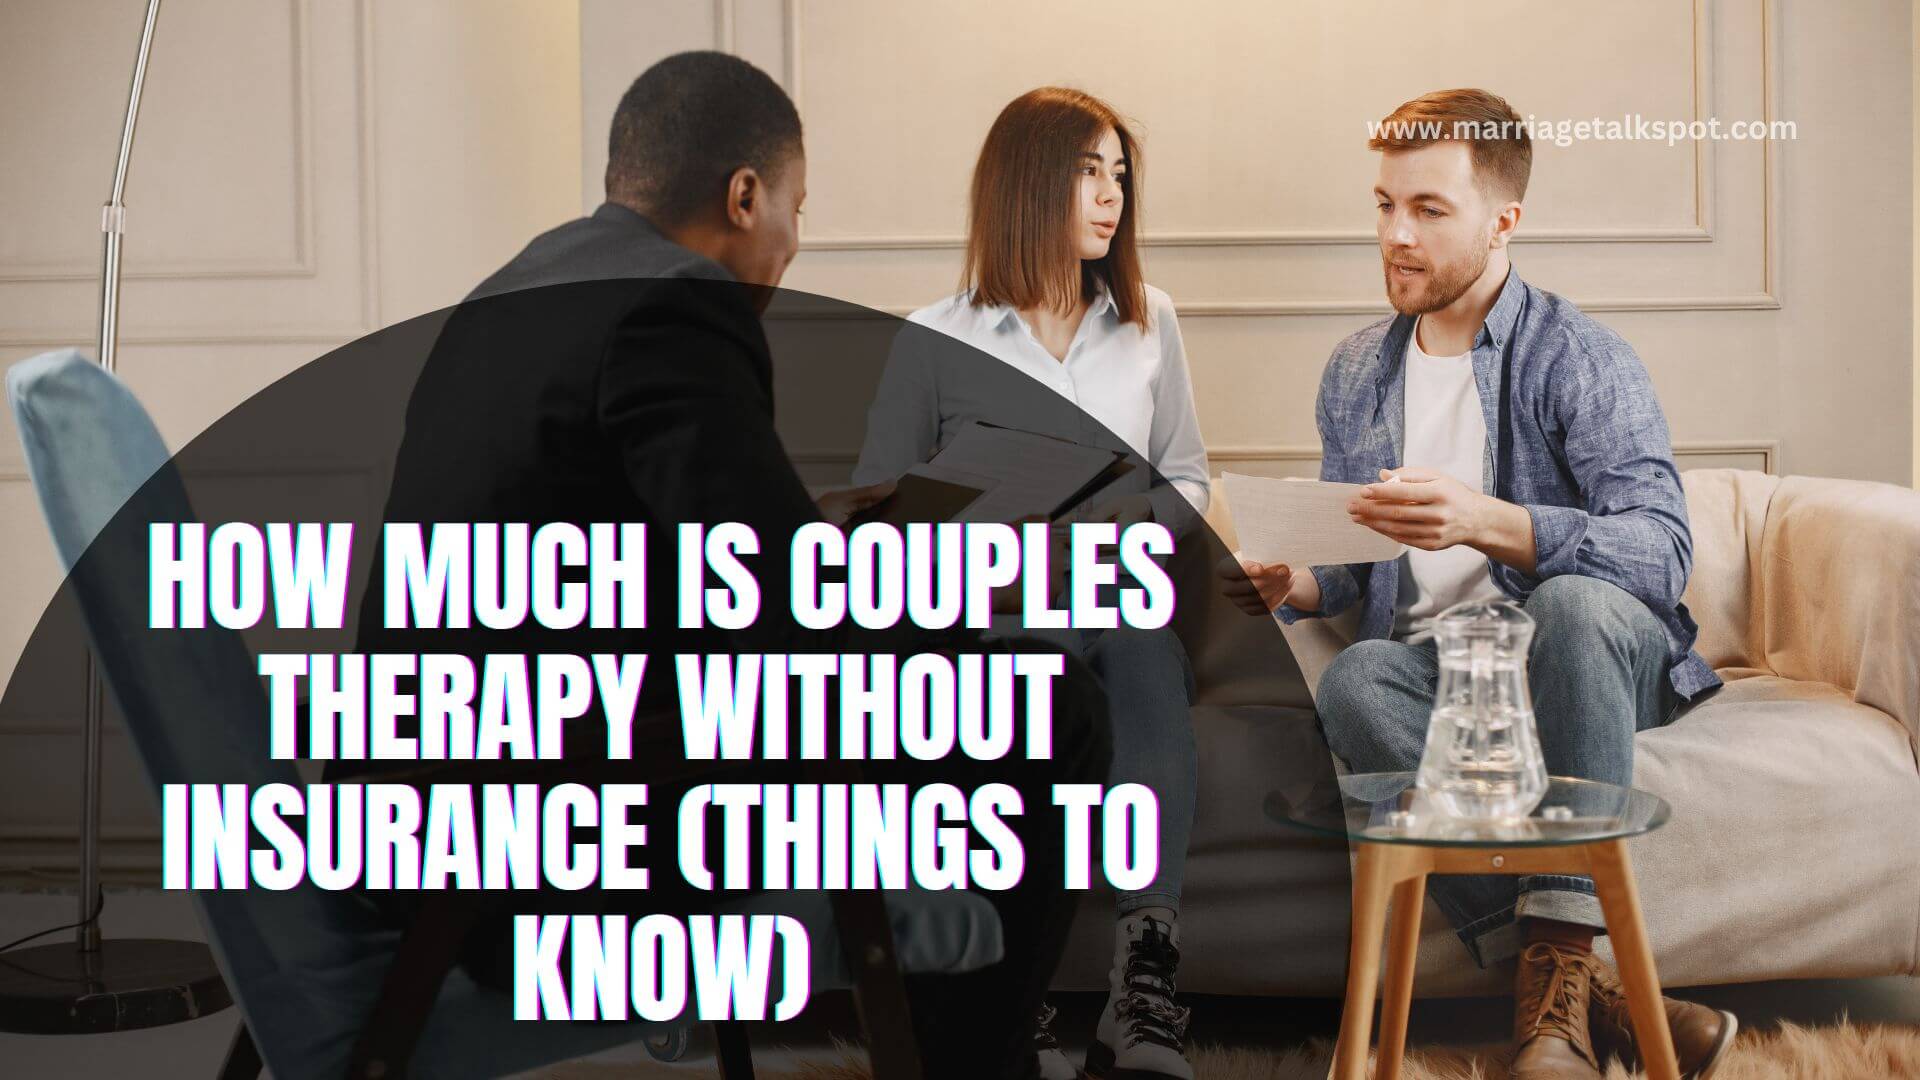 HOW MUCH IS COUPLES THERAPY WITHOUT INSURANCE (THINGS TO KNOW) (1)